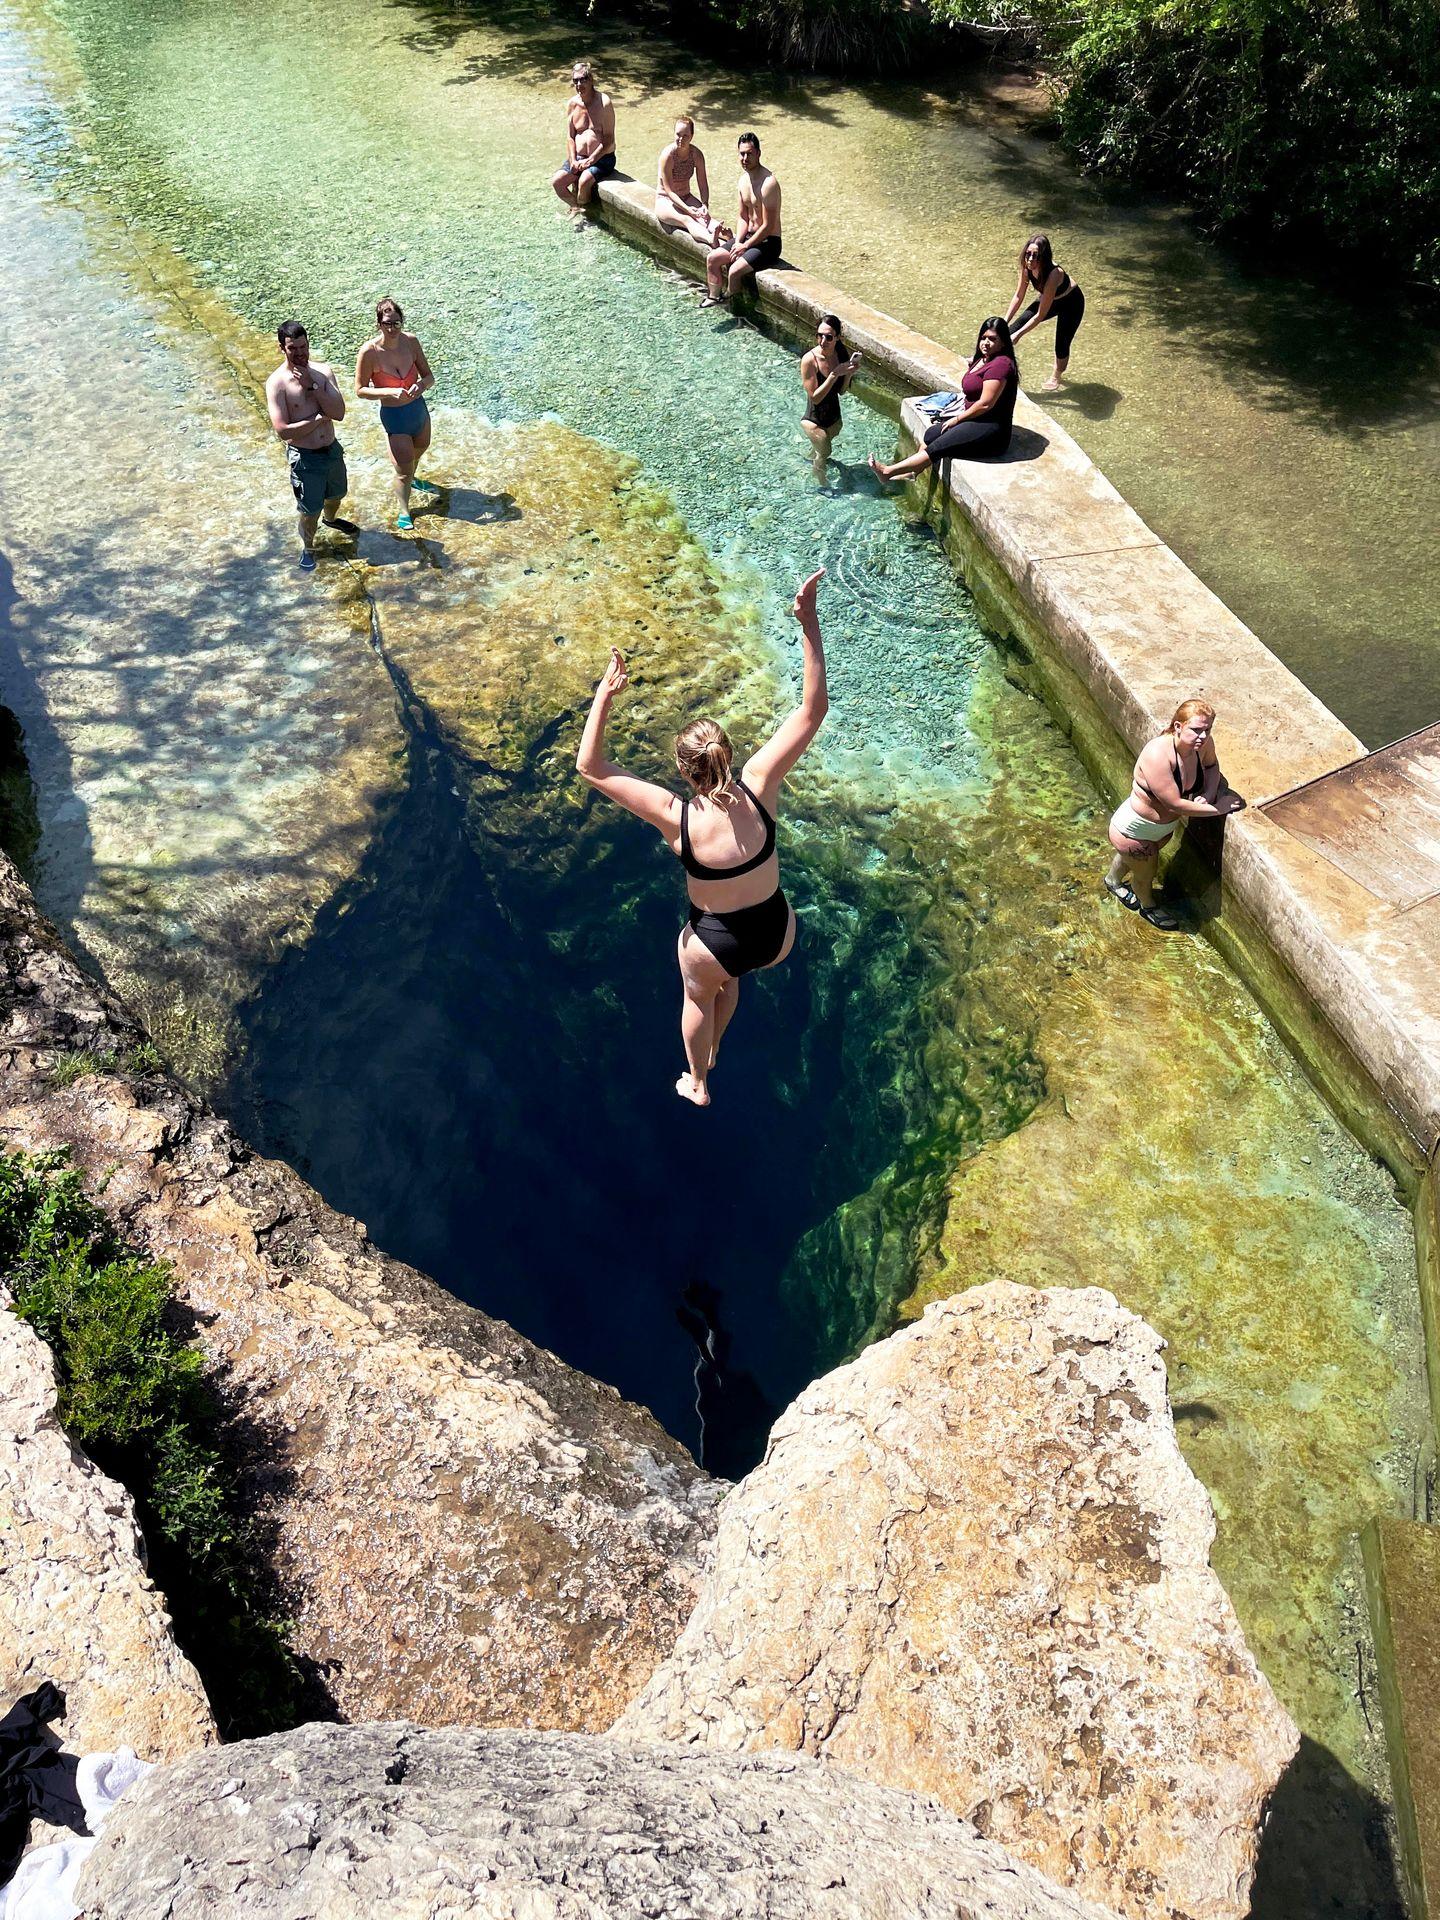 Lydia jumping in Jacob's Well. It looks like an underwater cave.